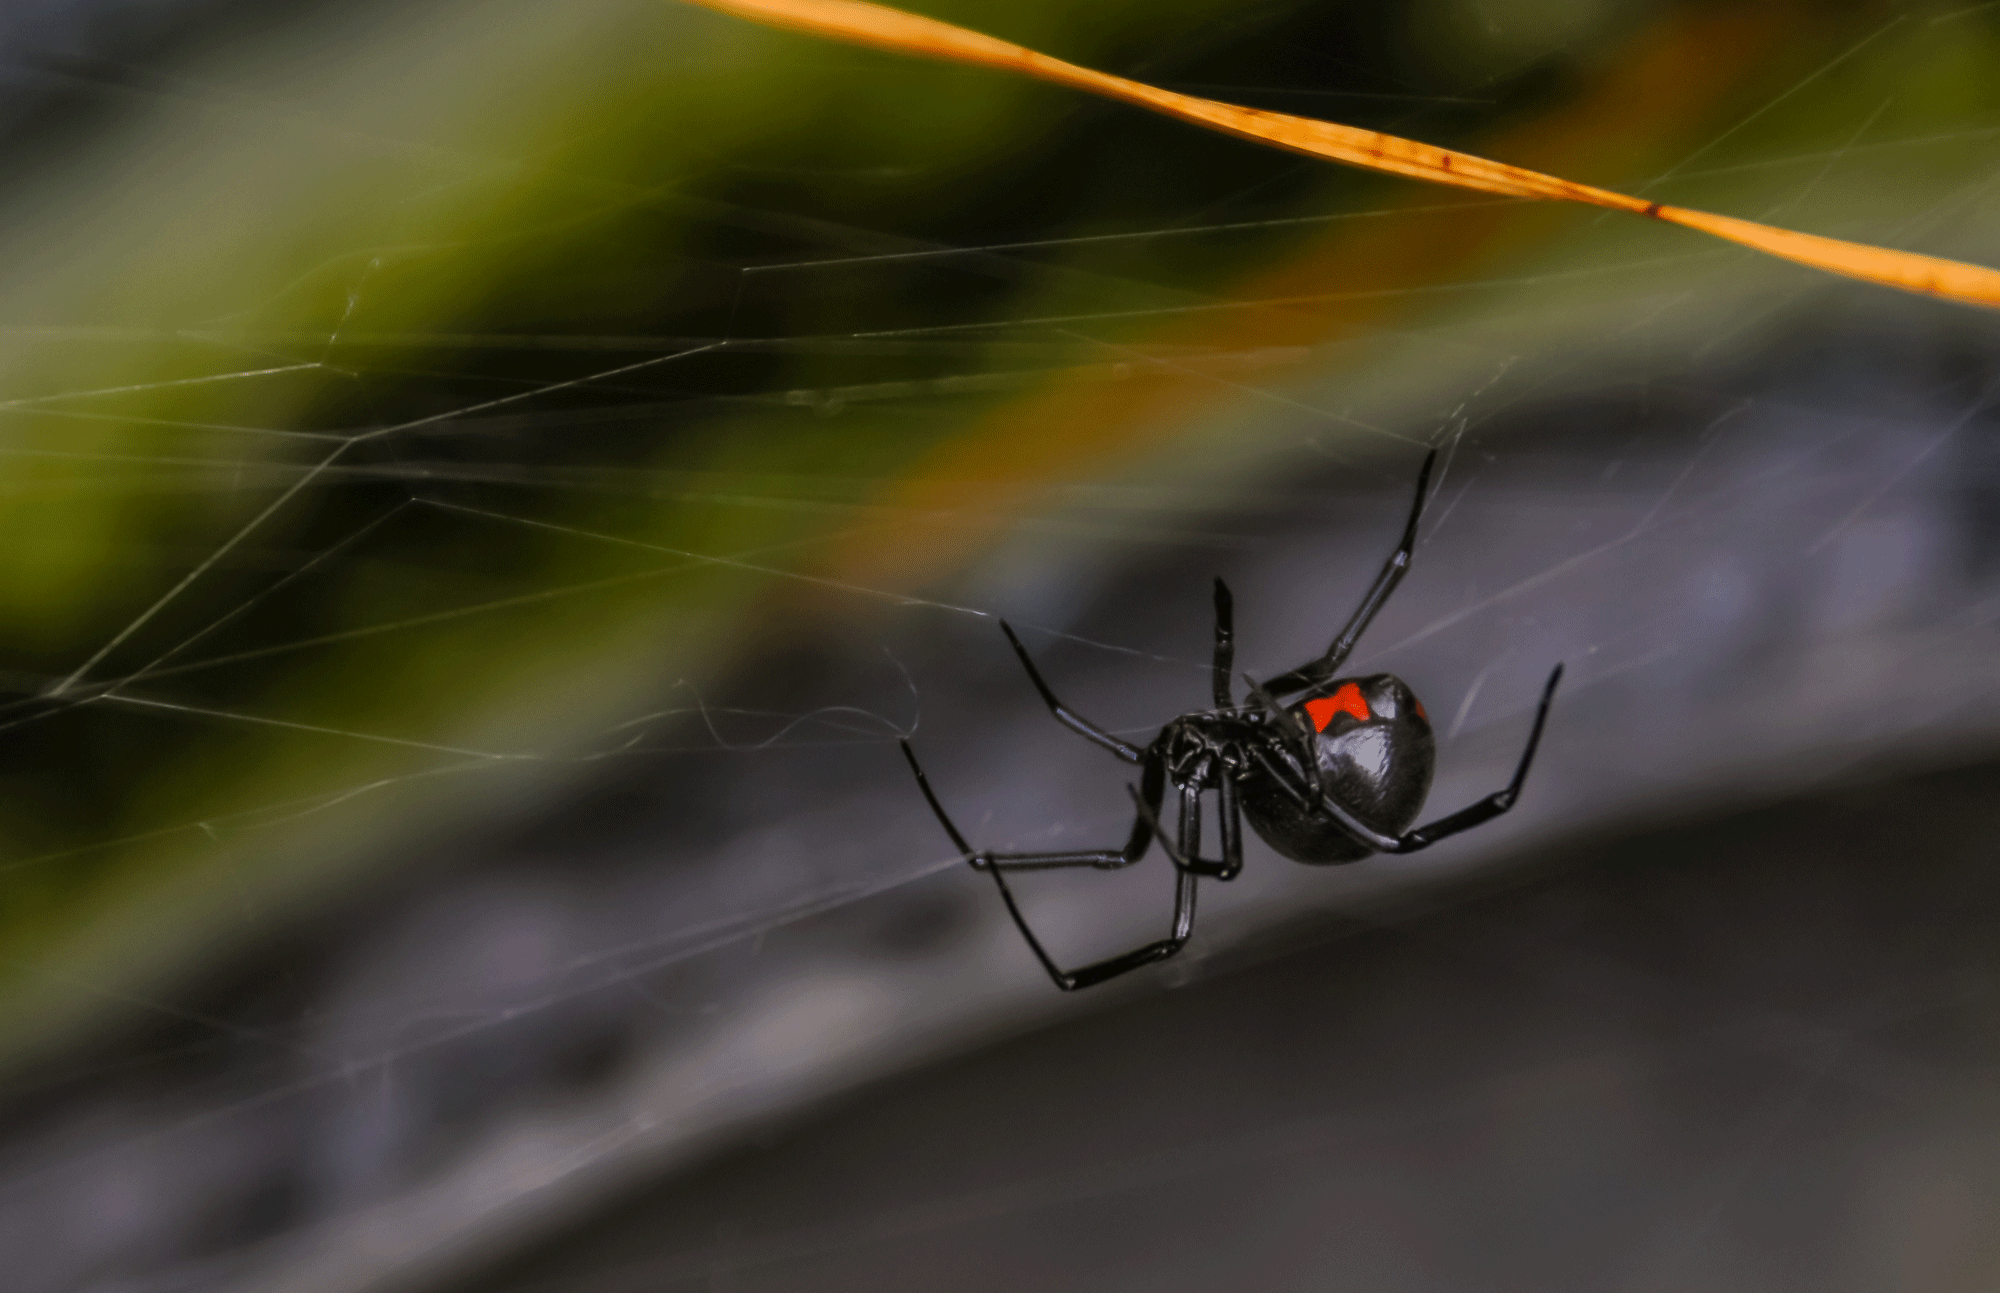 A black widow spider in its web.